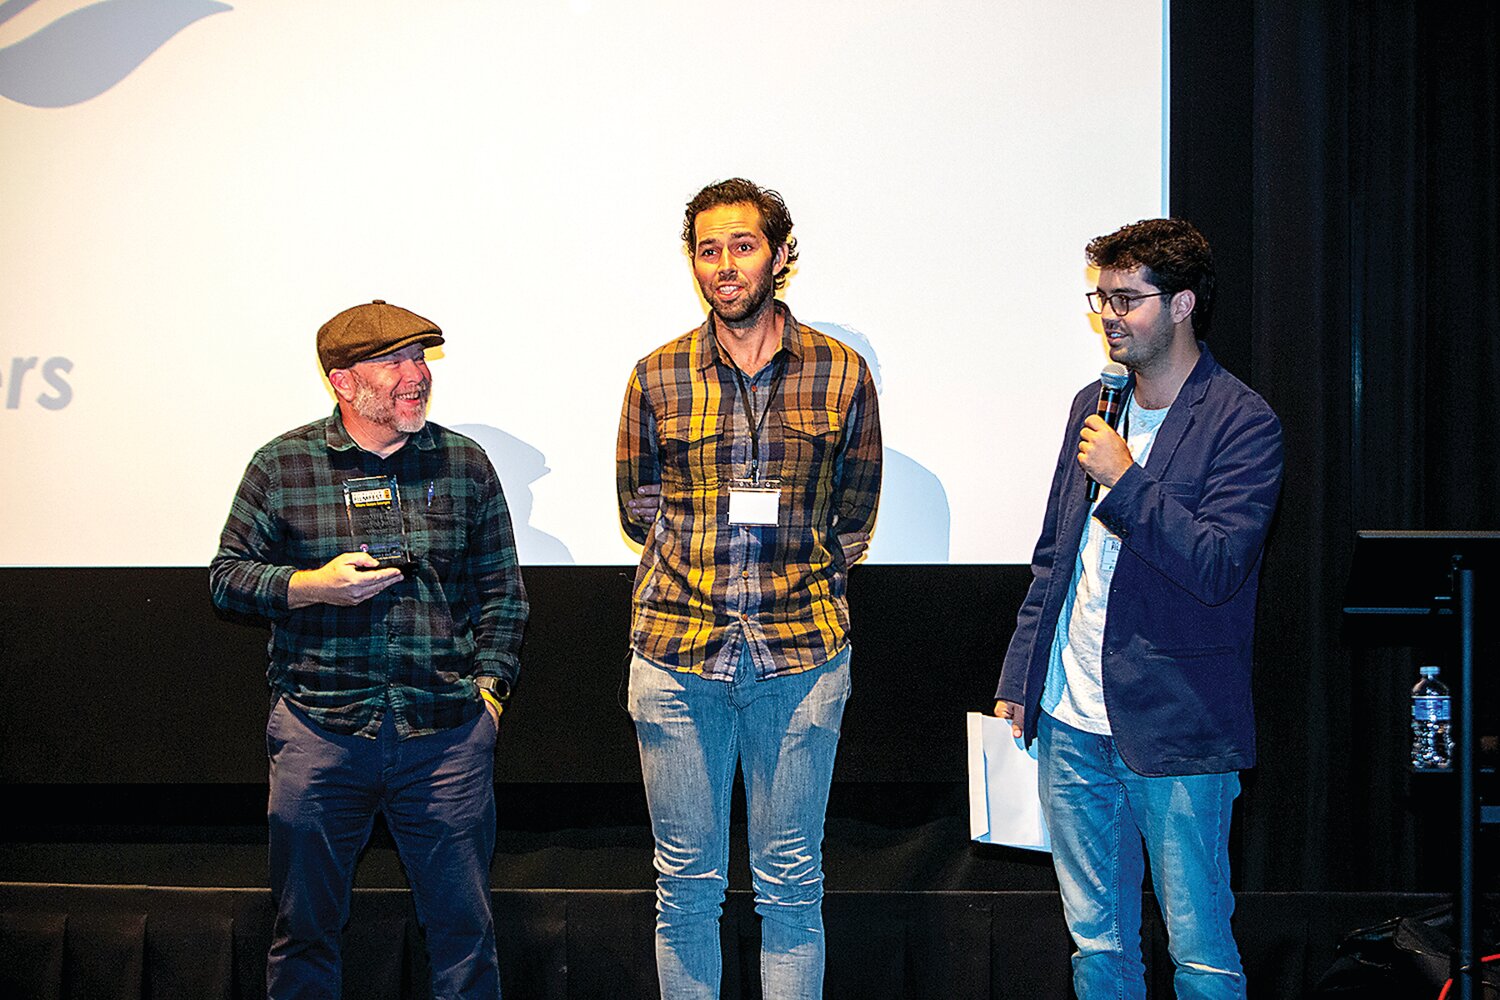 Brian Boger, of Bike Works, Chris Baccash, the subject of “Mountains We Climb” and filmmaker Ryan Canney were recognized at the Bucks Fever FilmFest when Canney’s documentary won “Best of the Fest” on Sunday Oct. 15.